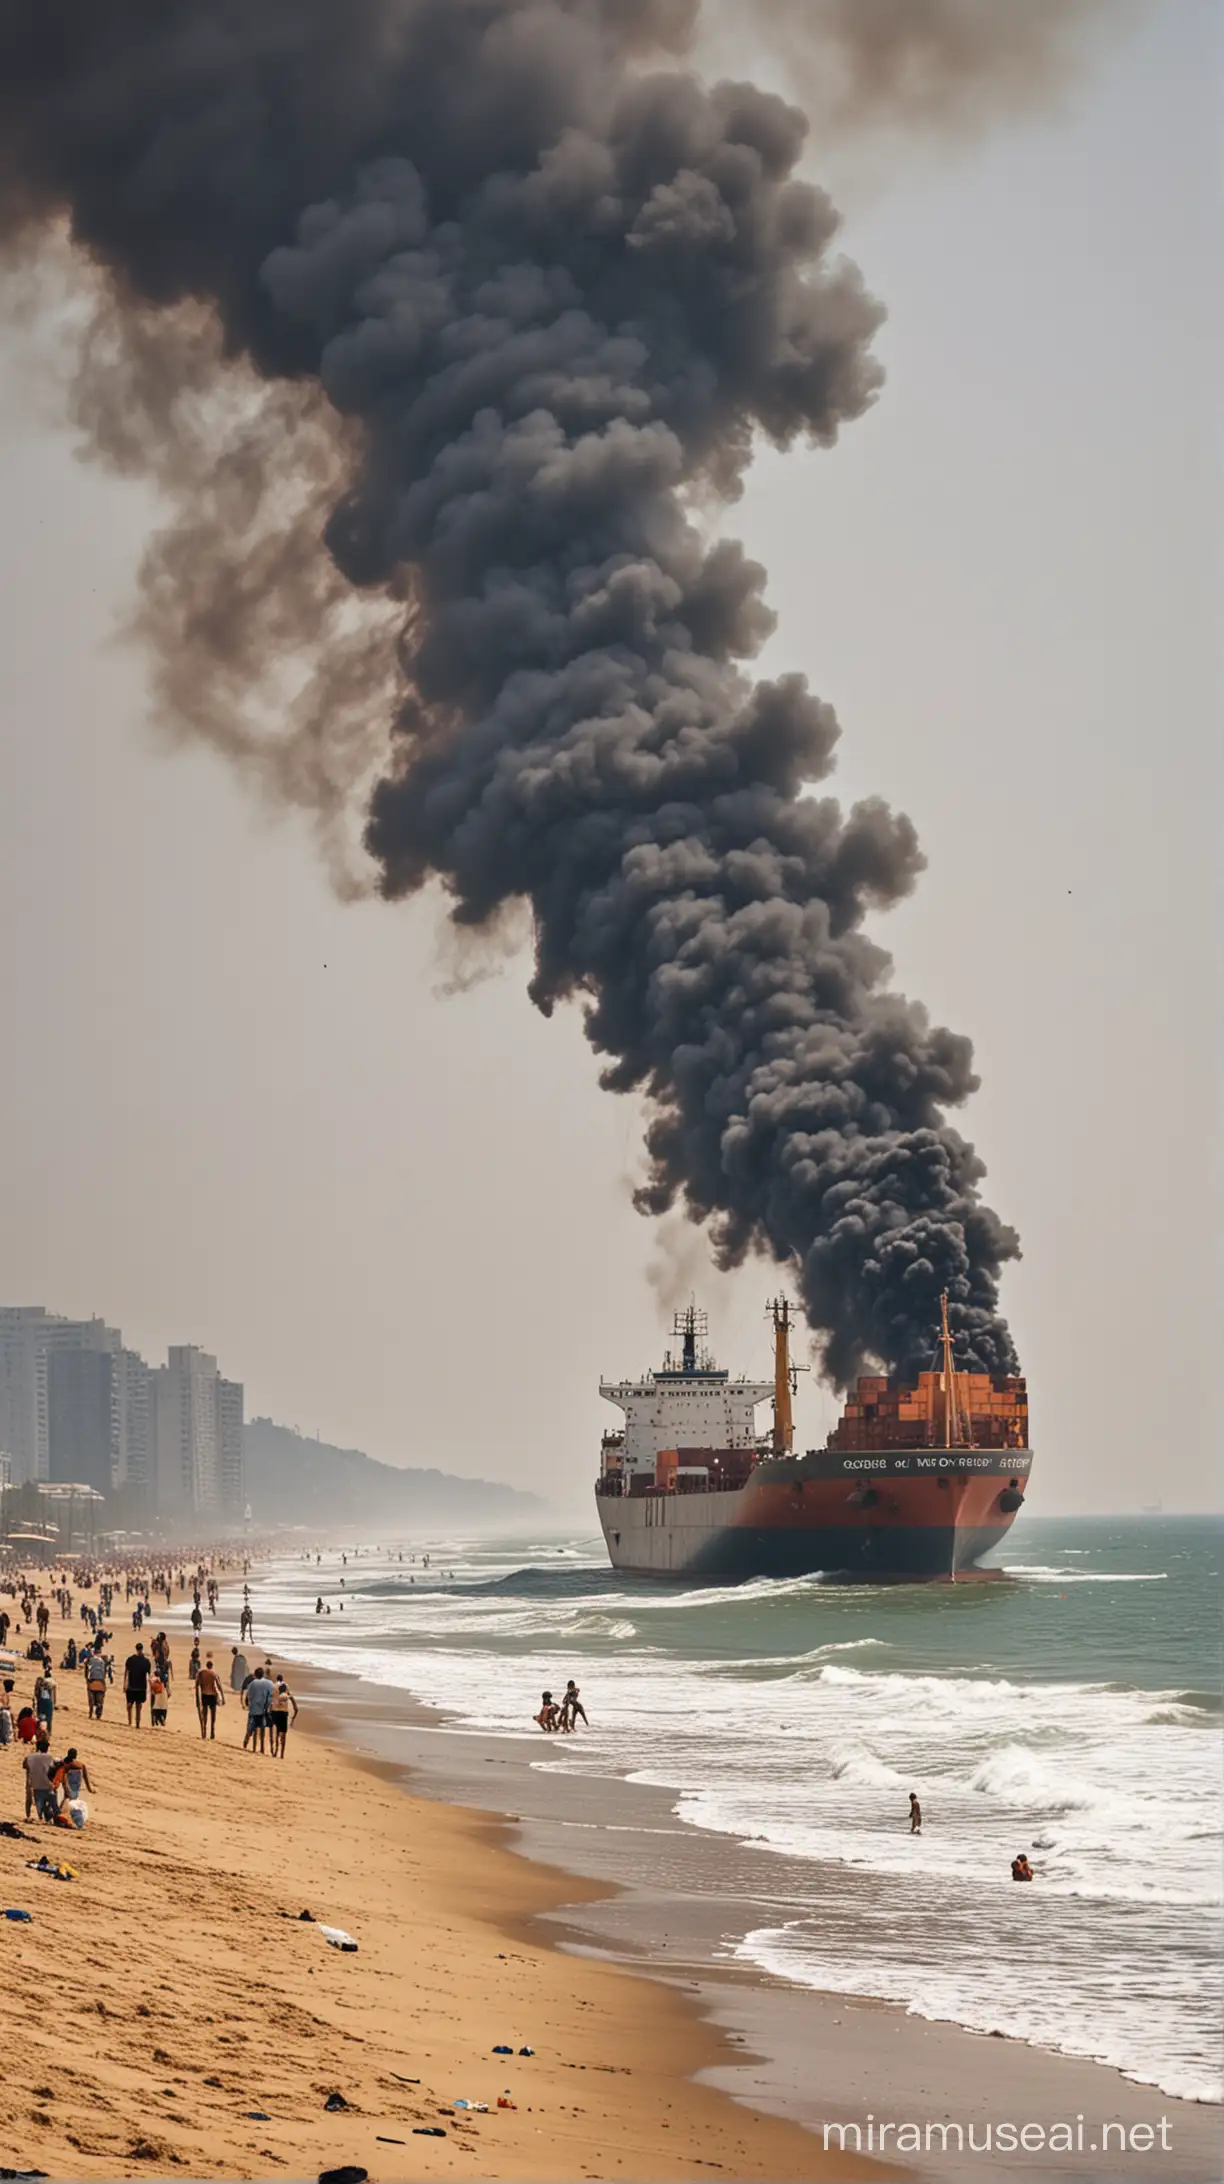 Cargo Ship with Smoking Stack Stranded at the Beach with Crowds